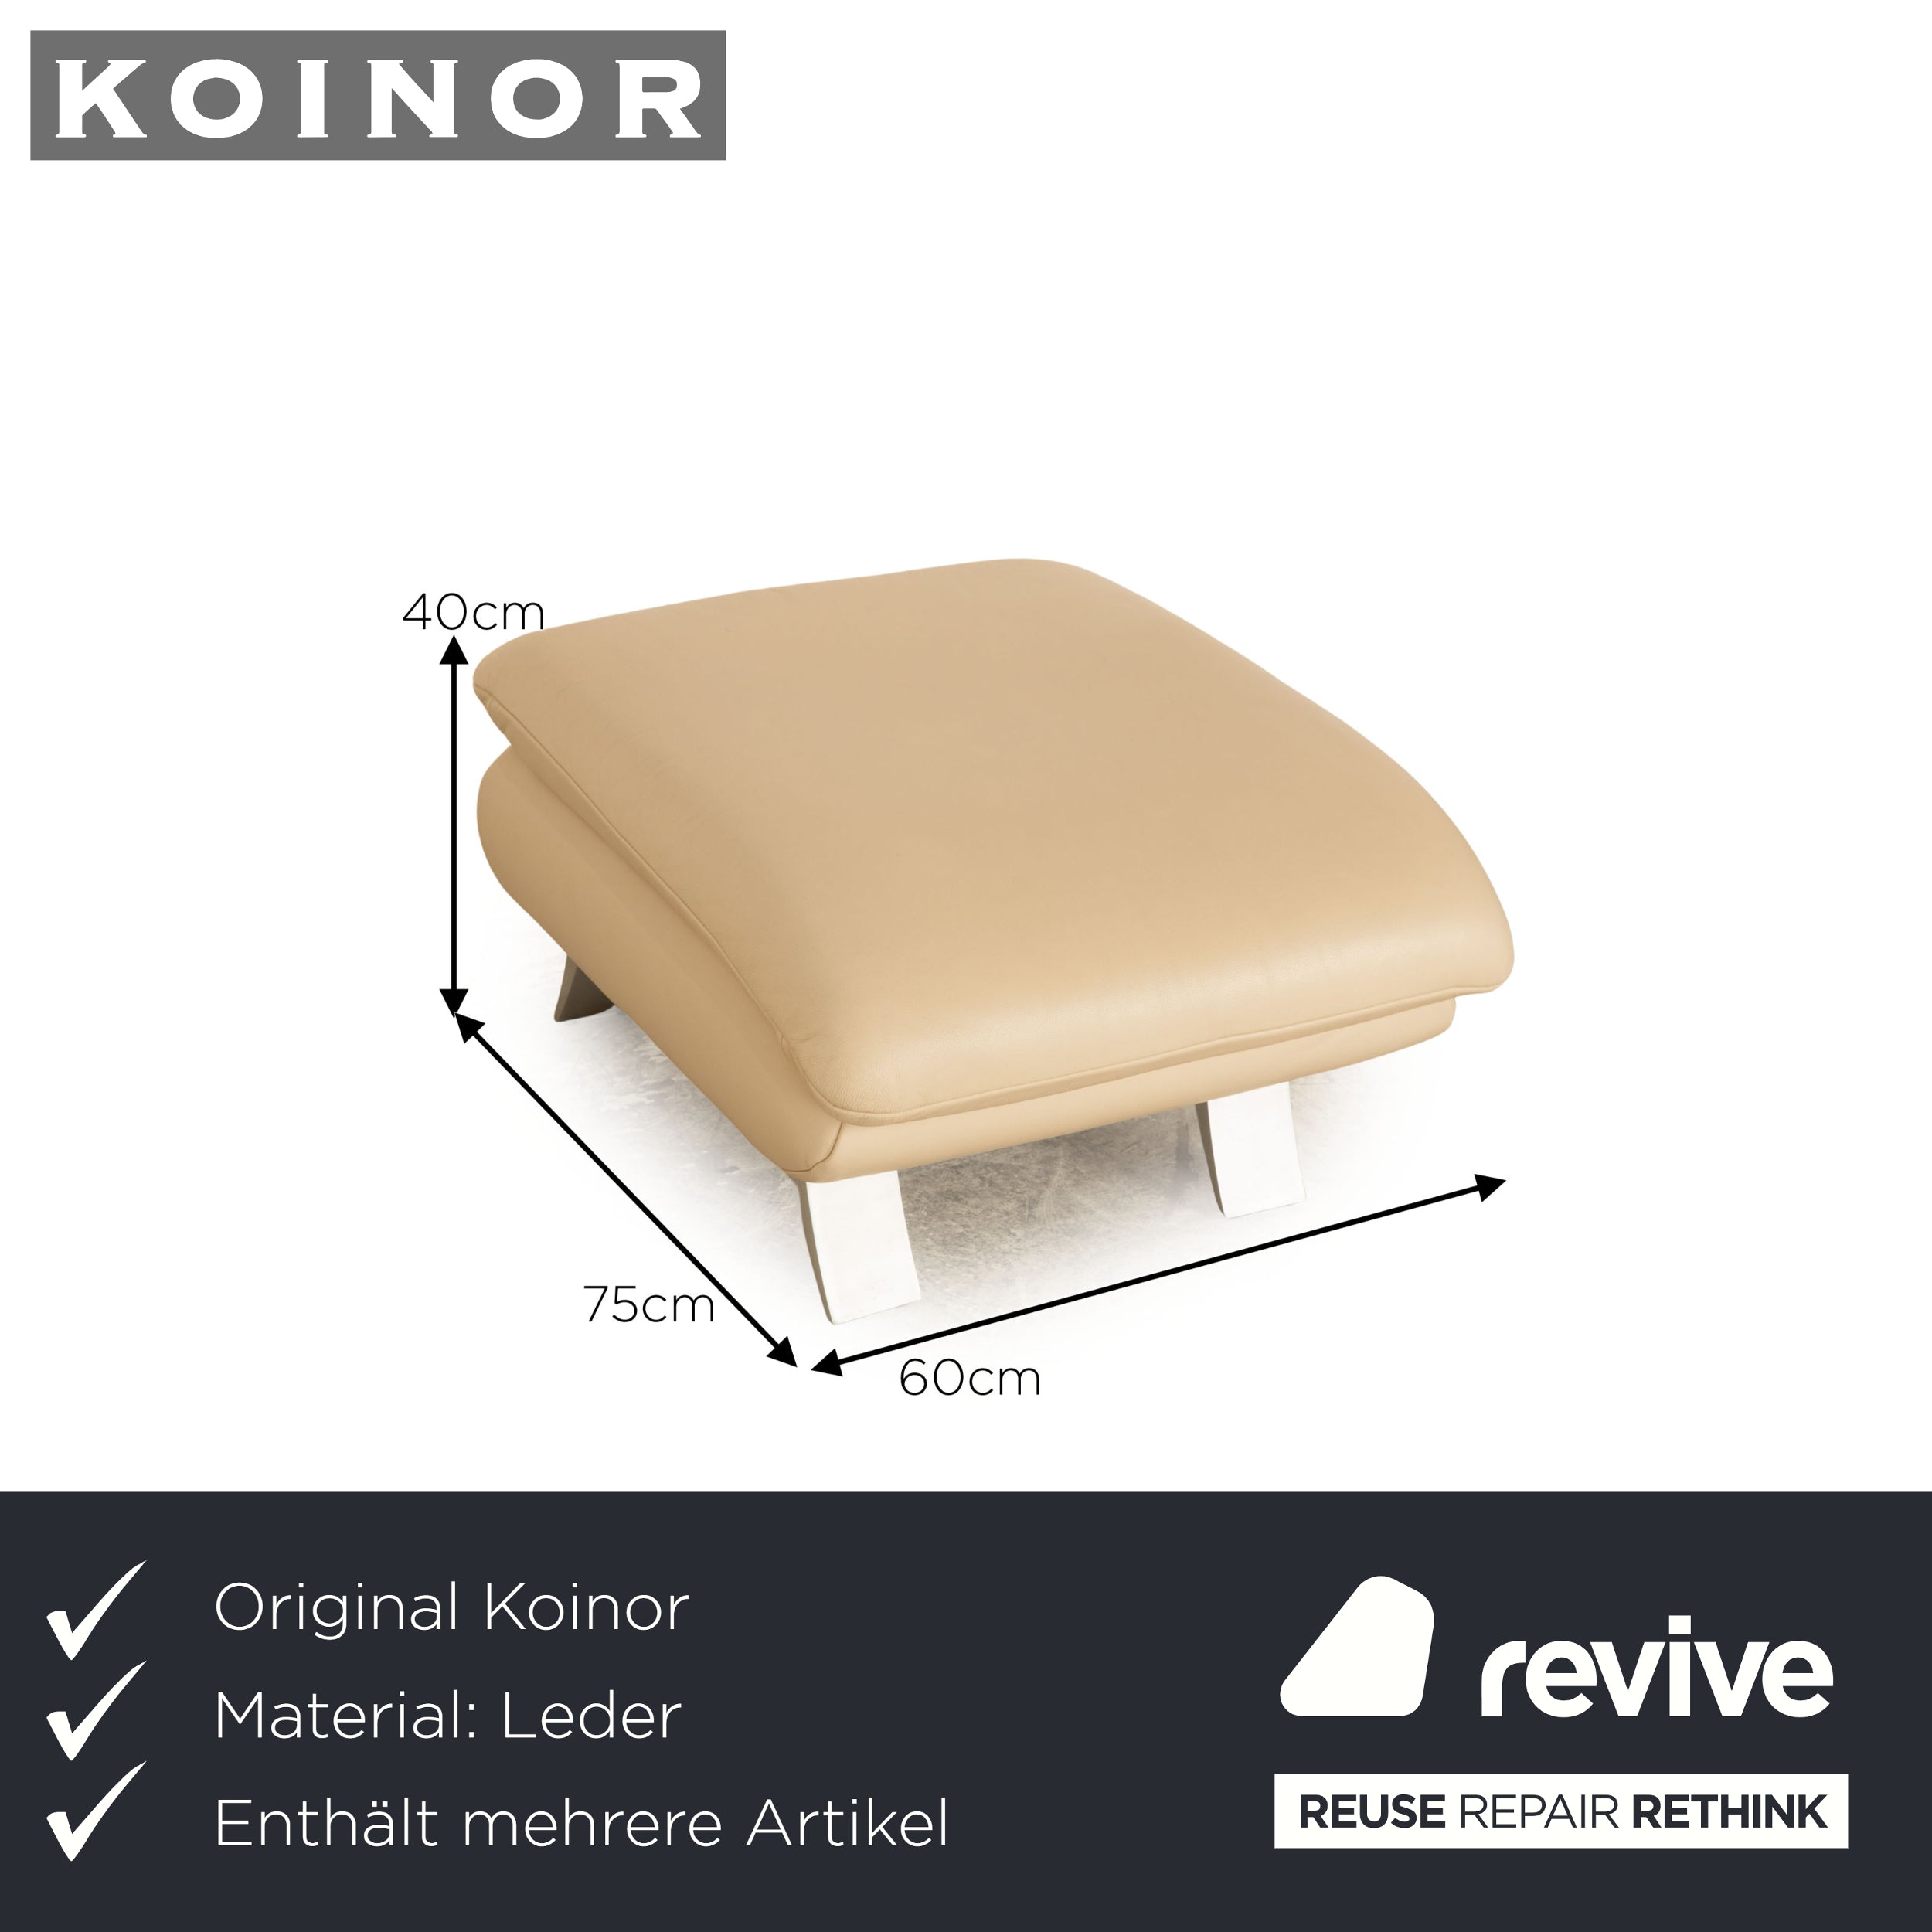 Koinor Rossini leather sofa set beige stool two-seater manual function sofa couch